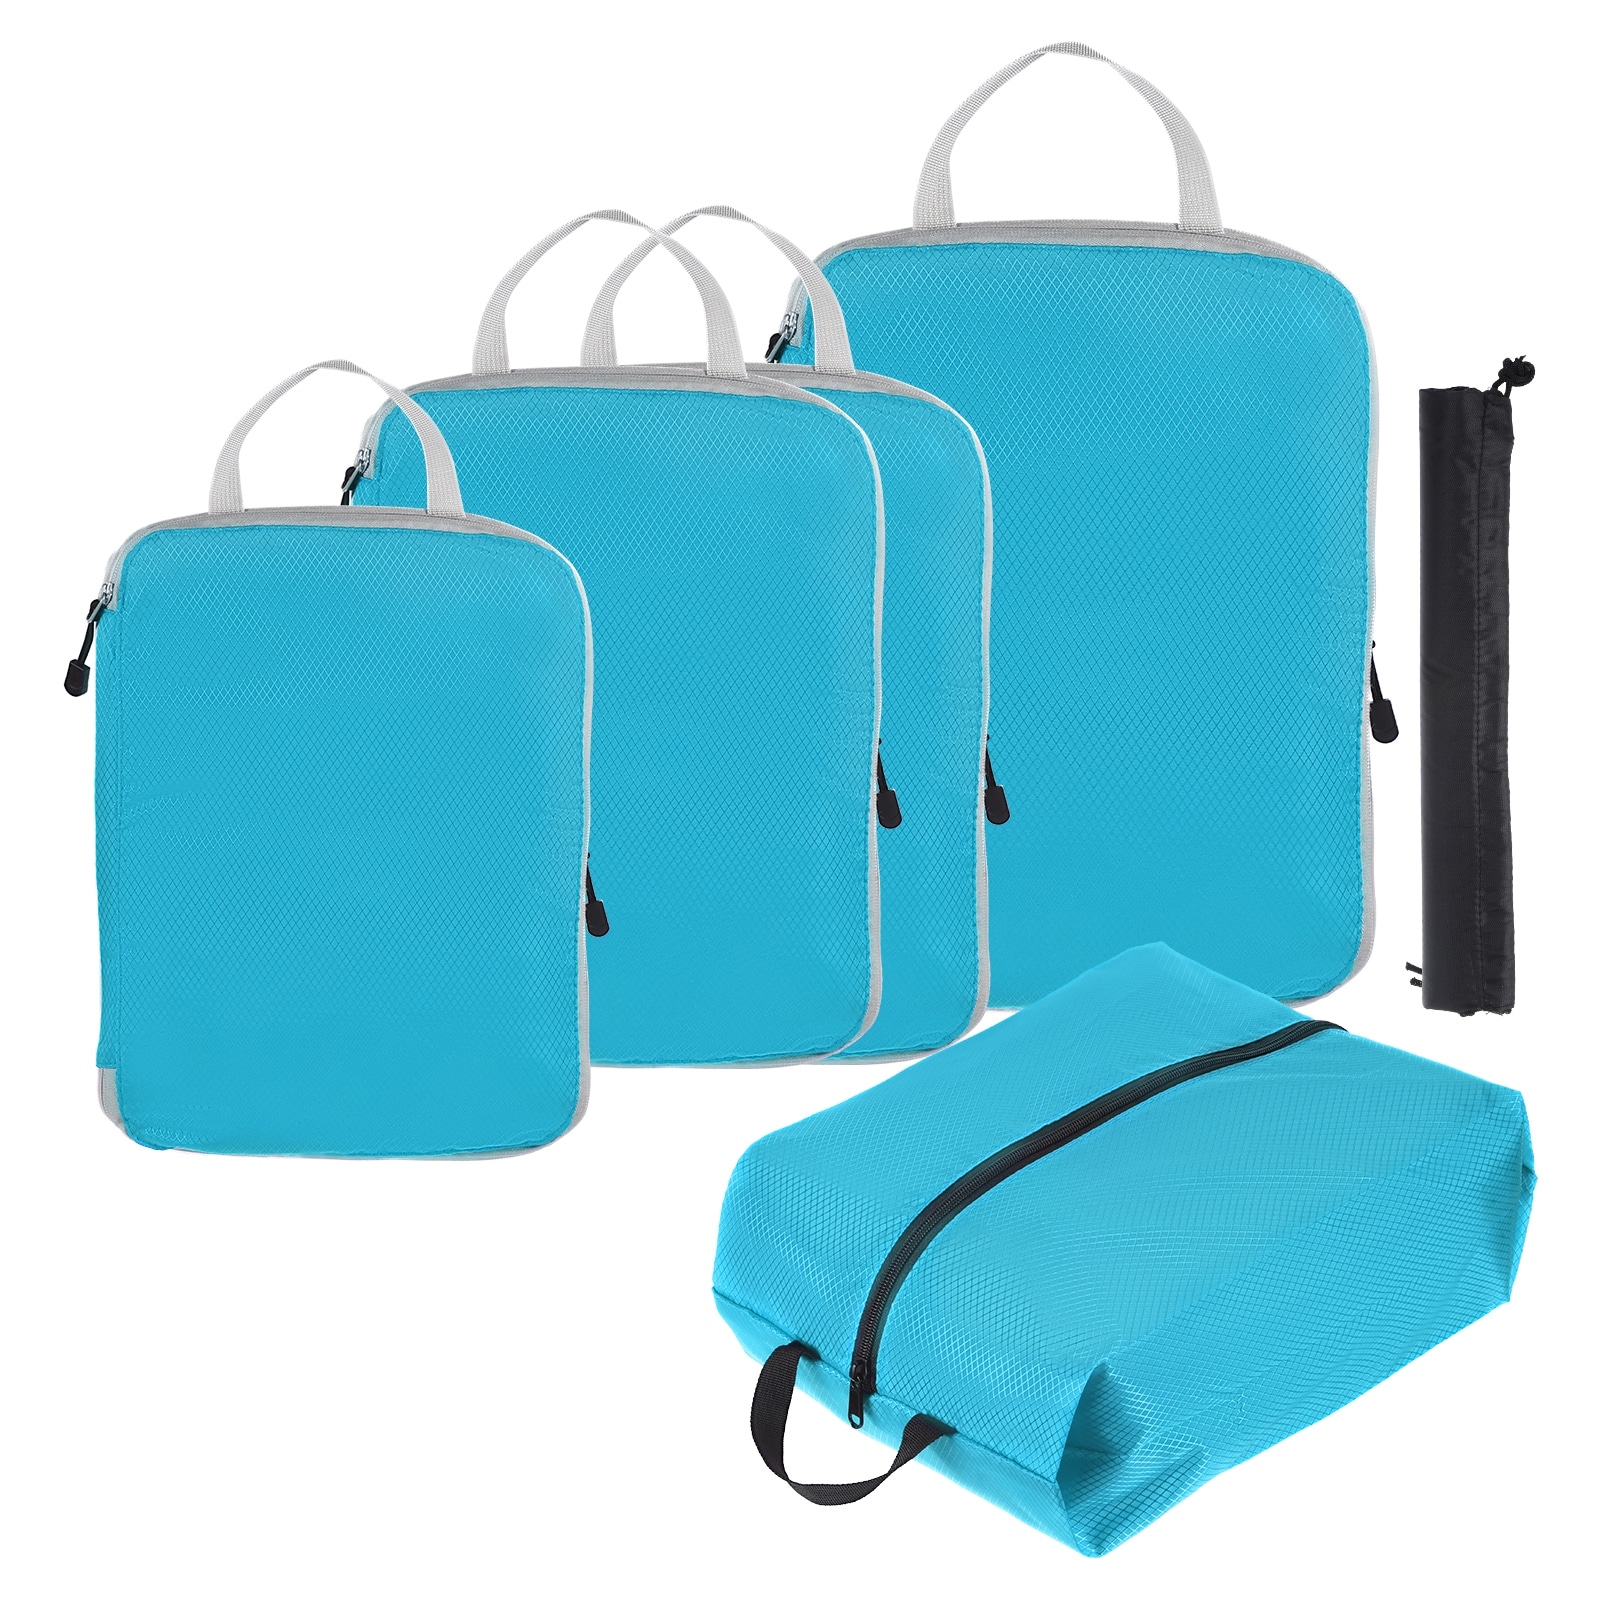 https://ak1.ostkcdn.com/images/products/is/images/direct/b665ba085981ad5f434b1c155879153de5fdc6b5/6Set-Compression-Packing-Cube-for-Travel-Waterproof-Luggage-Organizer-Sky-Blue.jpg